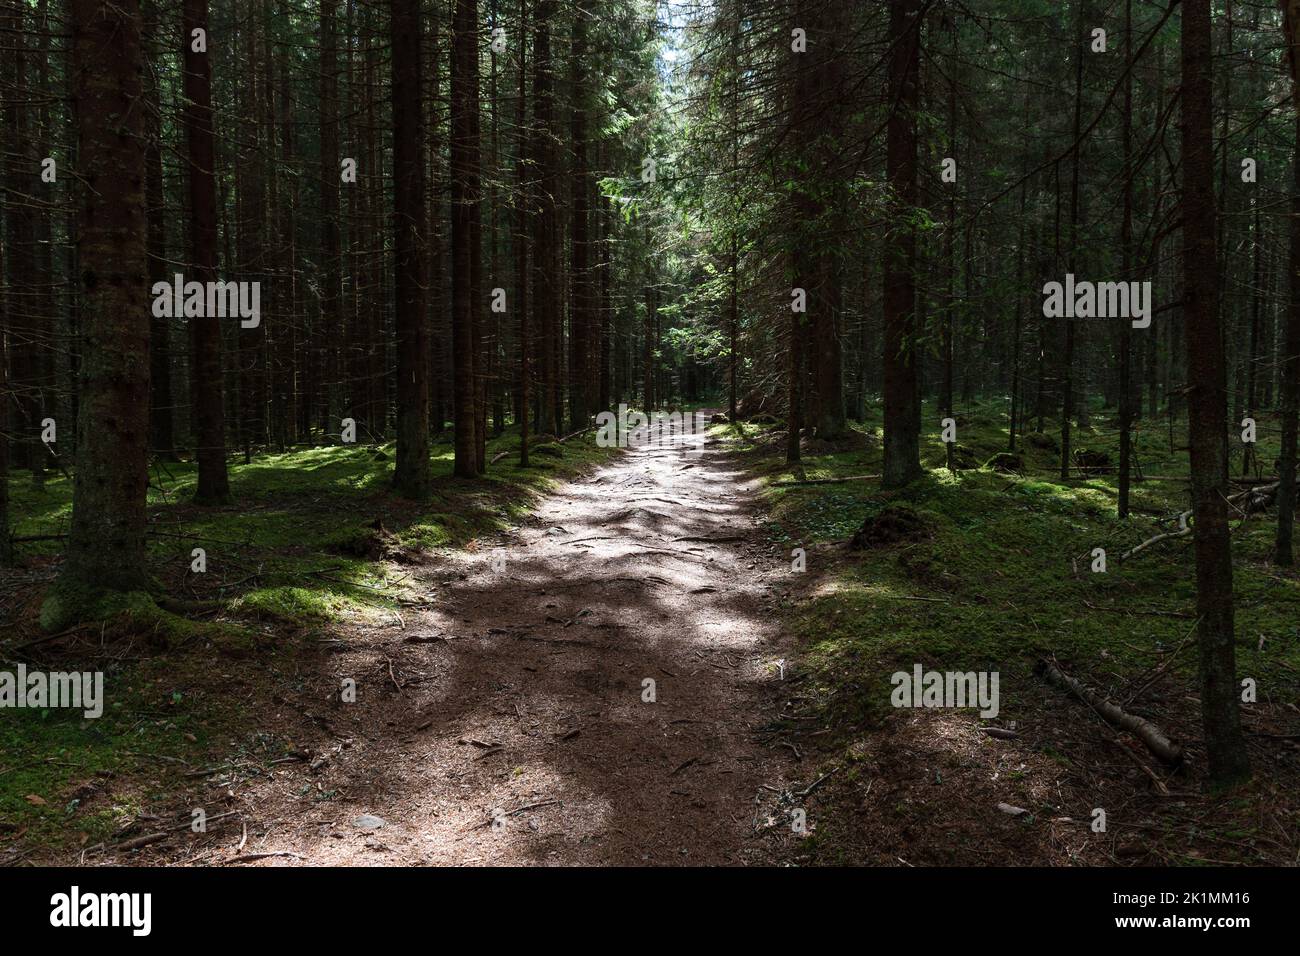 Light shining from between the trees to the path through a green forest with moss and pine trees Stock Photo